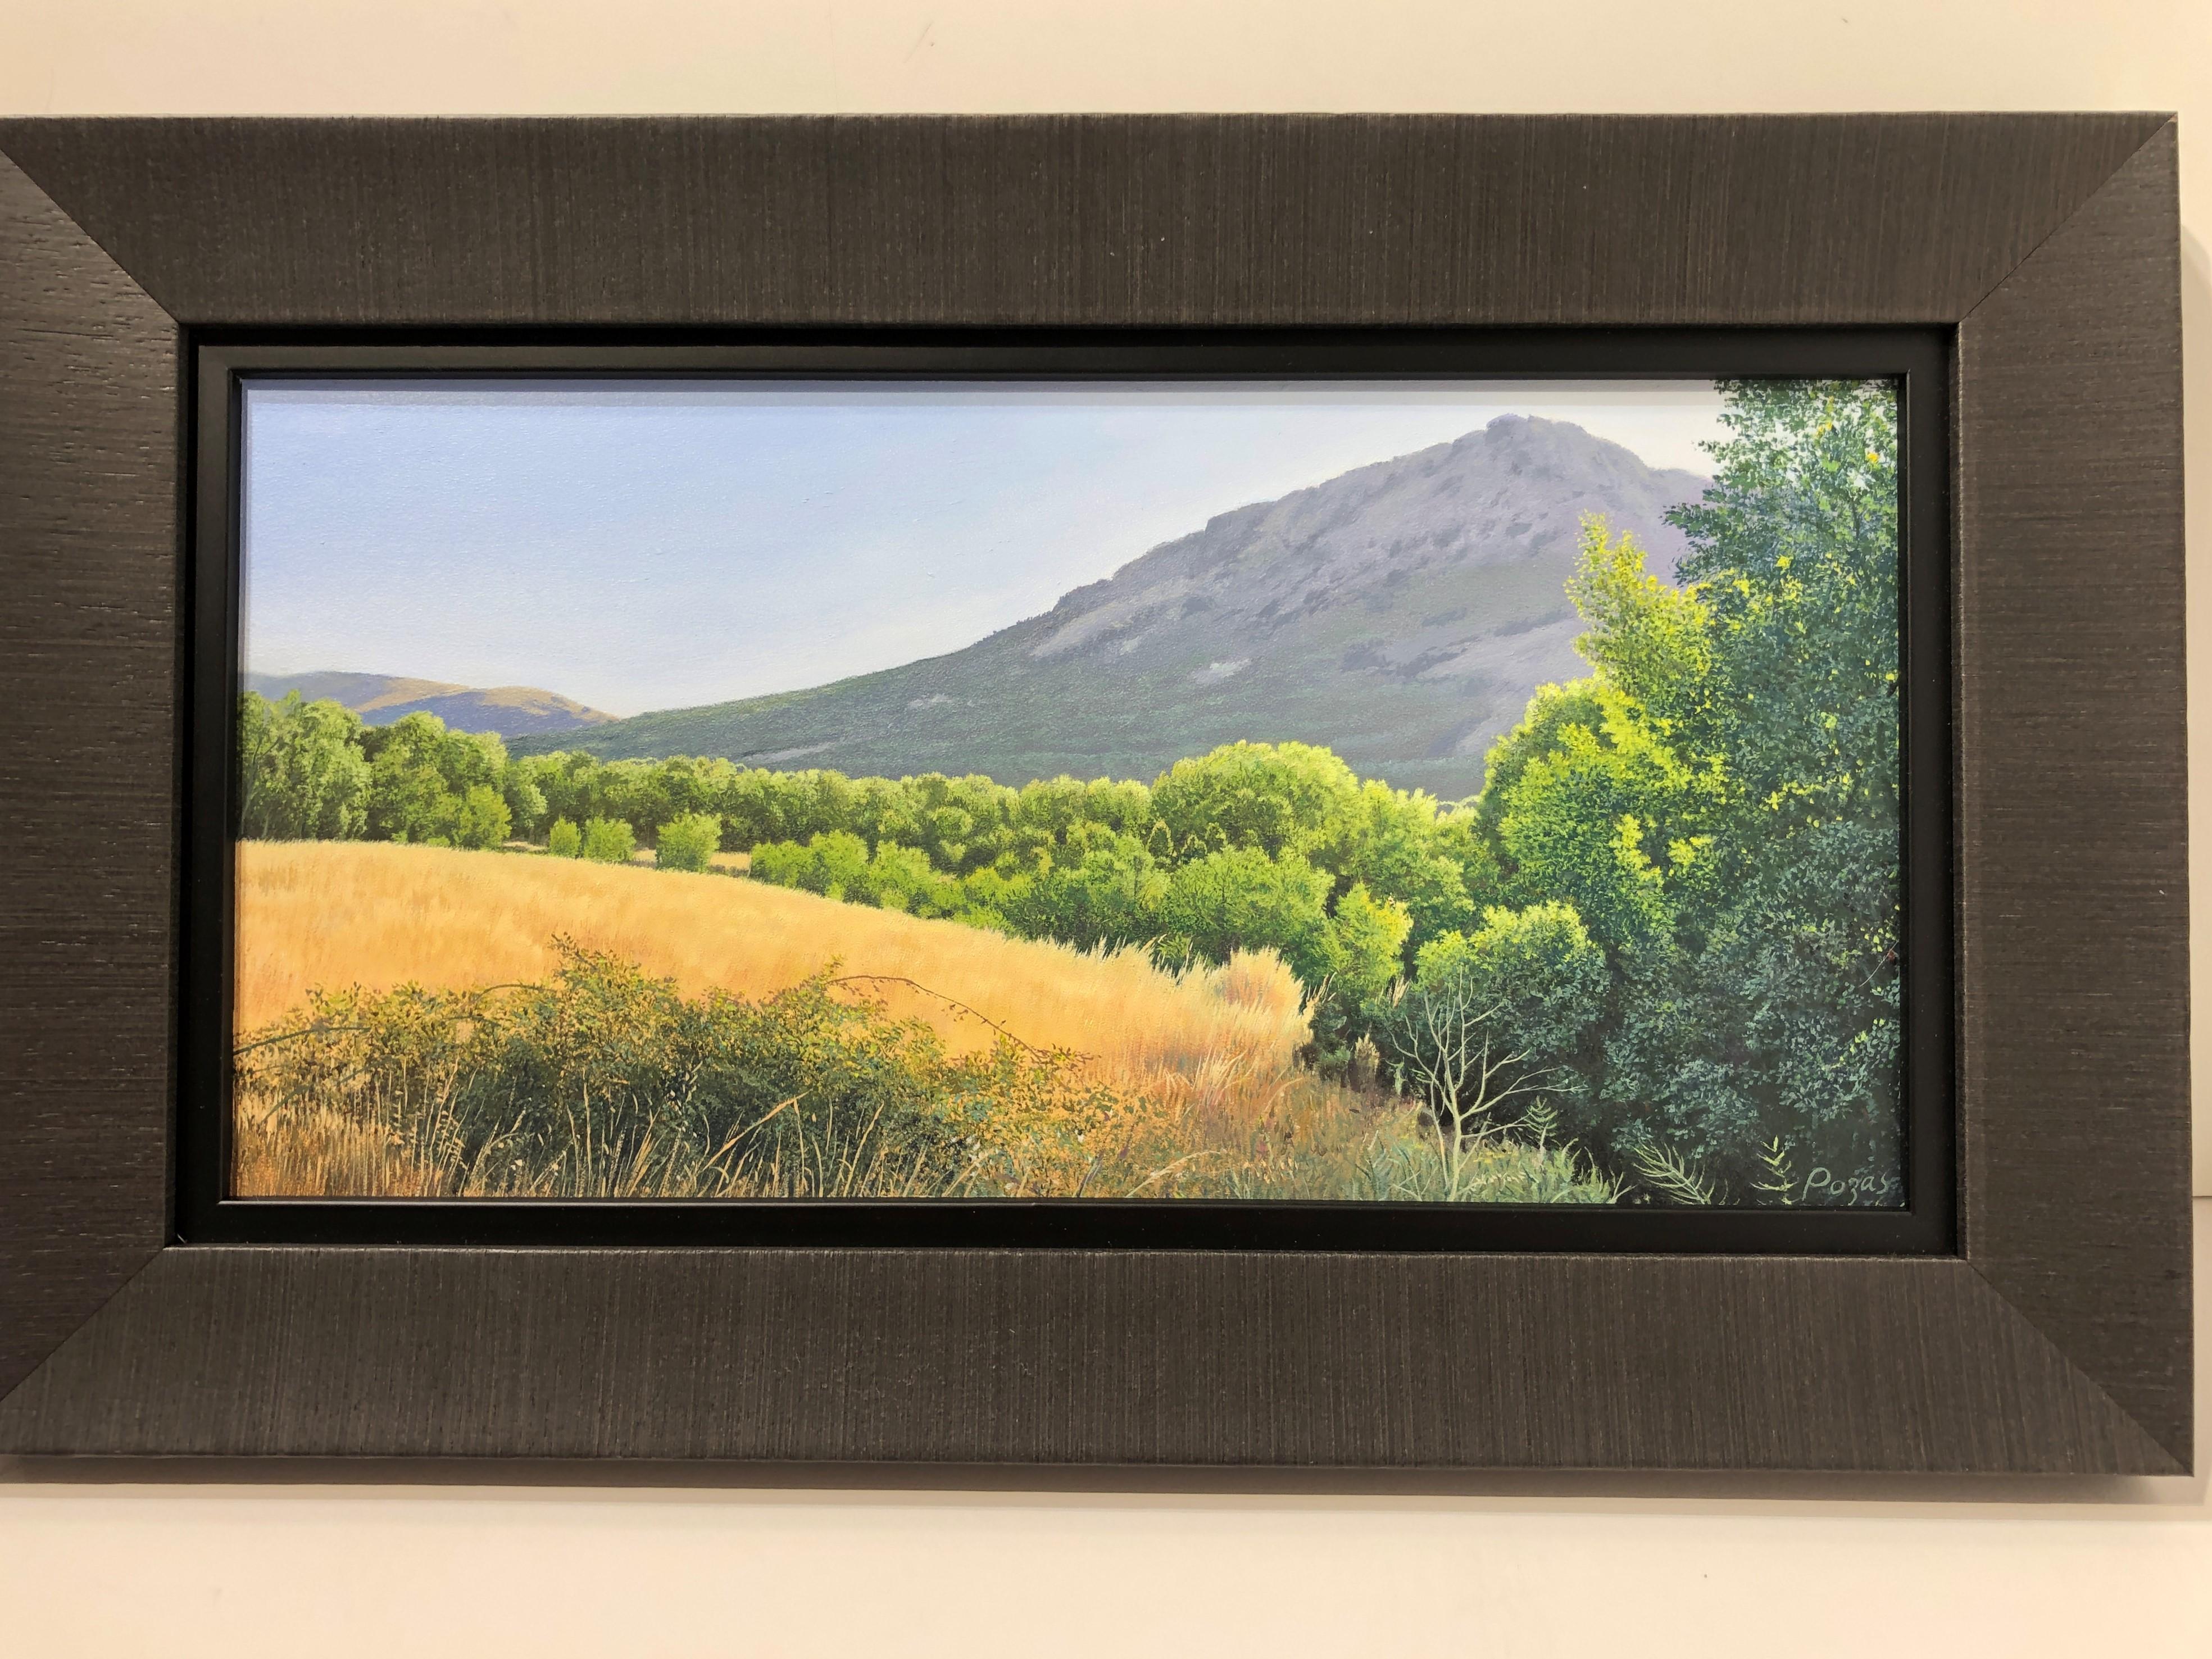 Awhile, Highly Detailed Lush Landscape with Golden Field and Mountain, Framed - Painting by René Monzón Relova “Pozas”